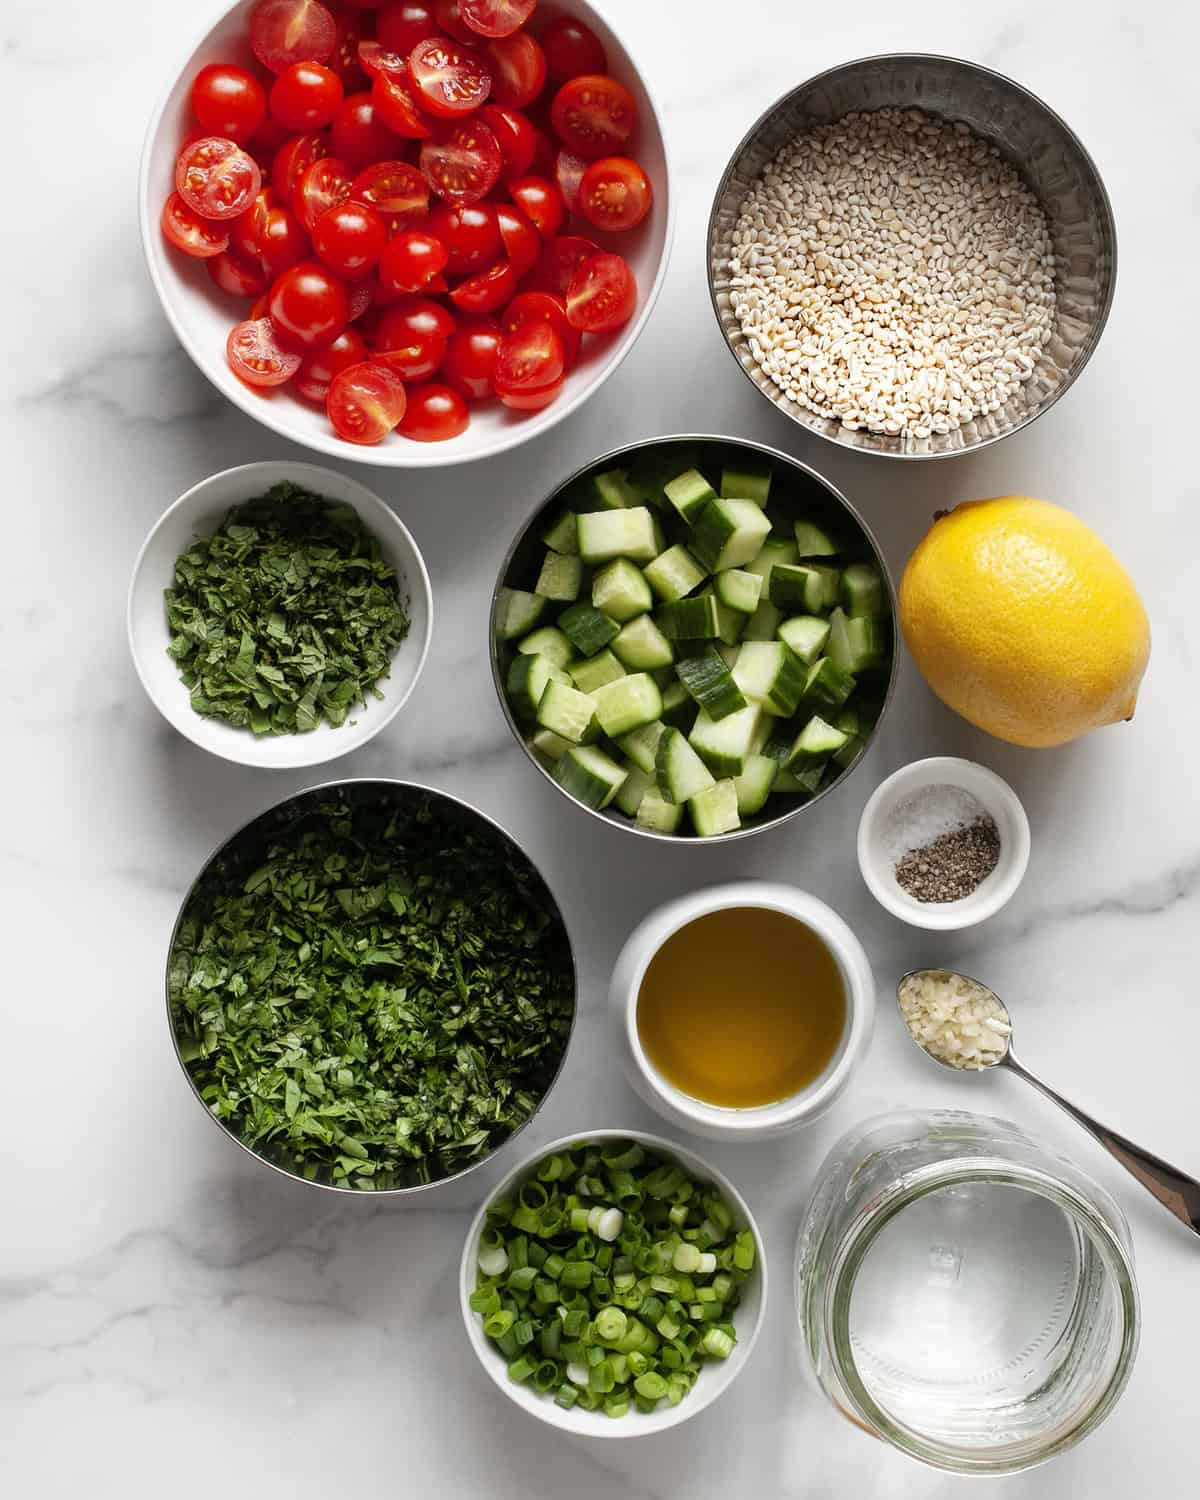 Ingredients including parsley, mint, lemon, olive oil, tomatoes, cucumbers, scallions, garlic and barley.